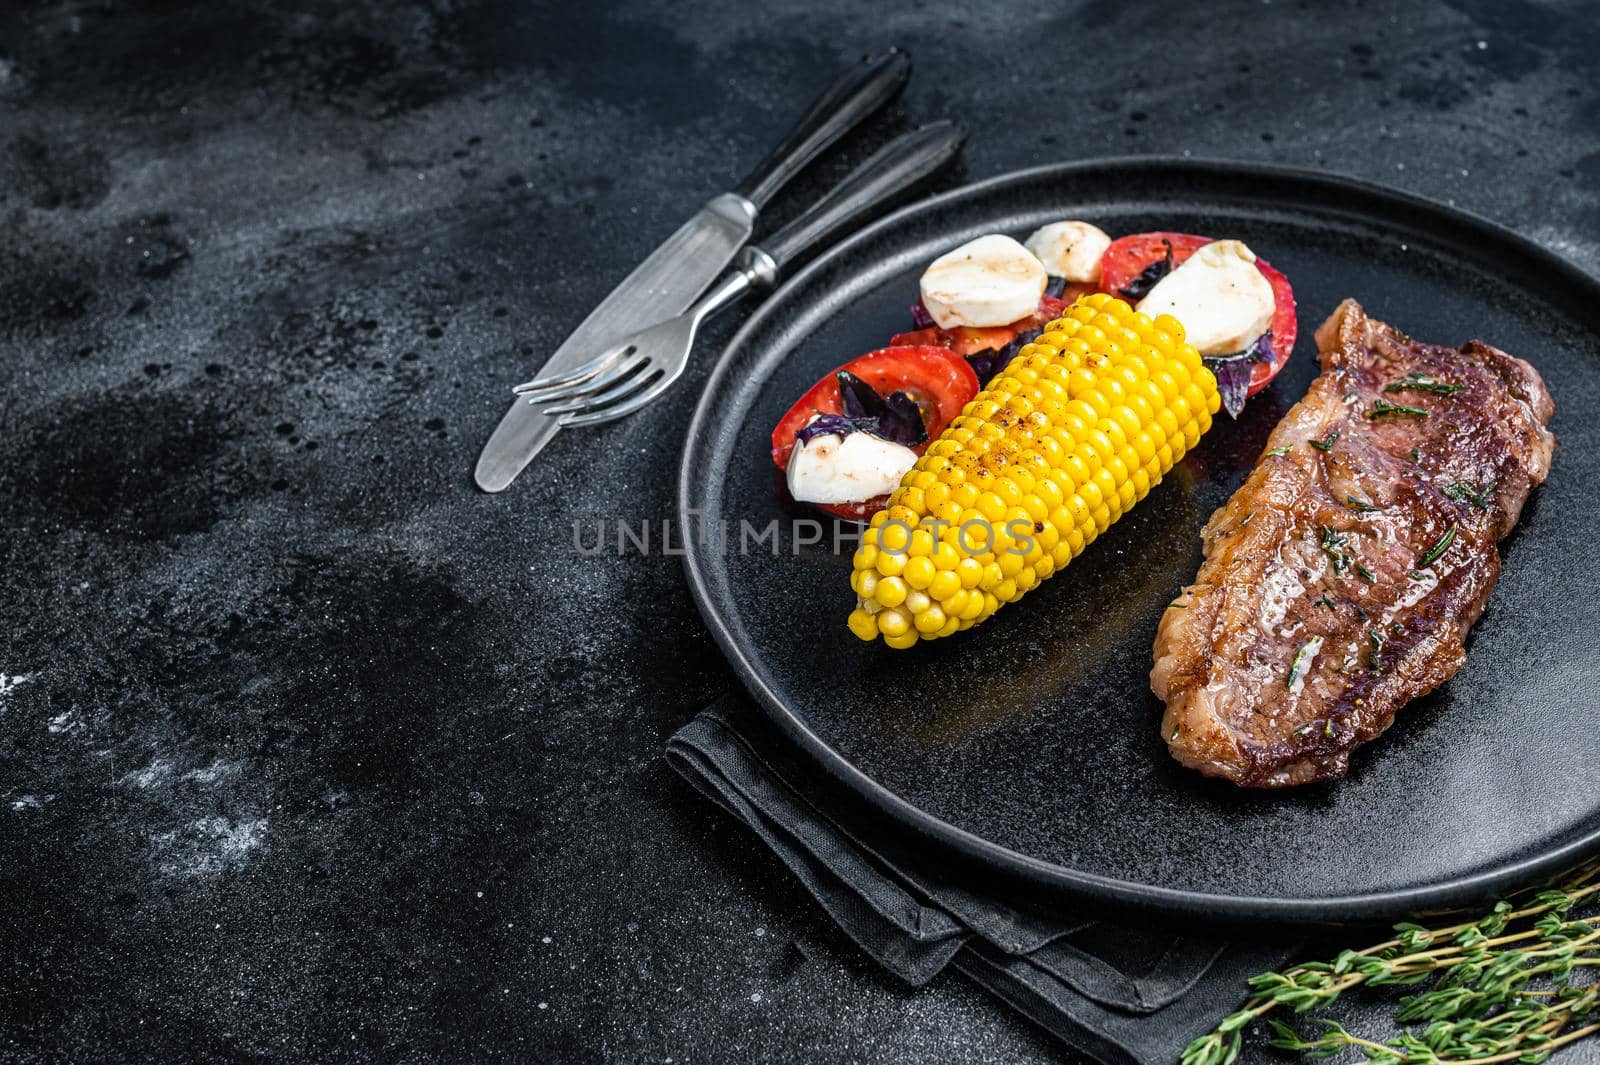 Roasted P beef steaks Striploin or New York on a plate with garnish. Black background. Top view. Copy space.